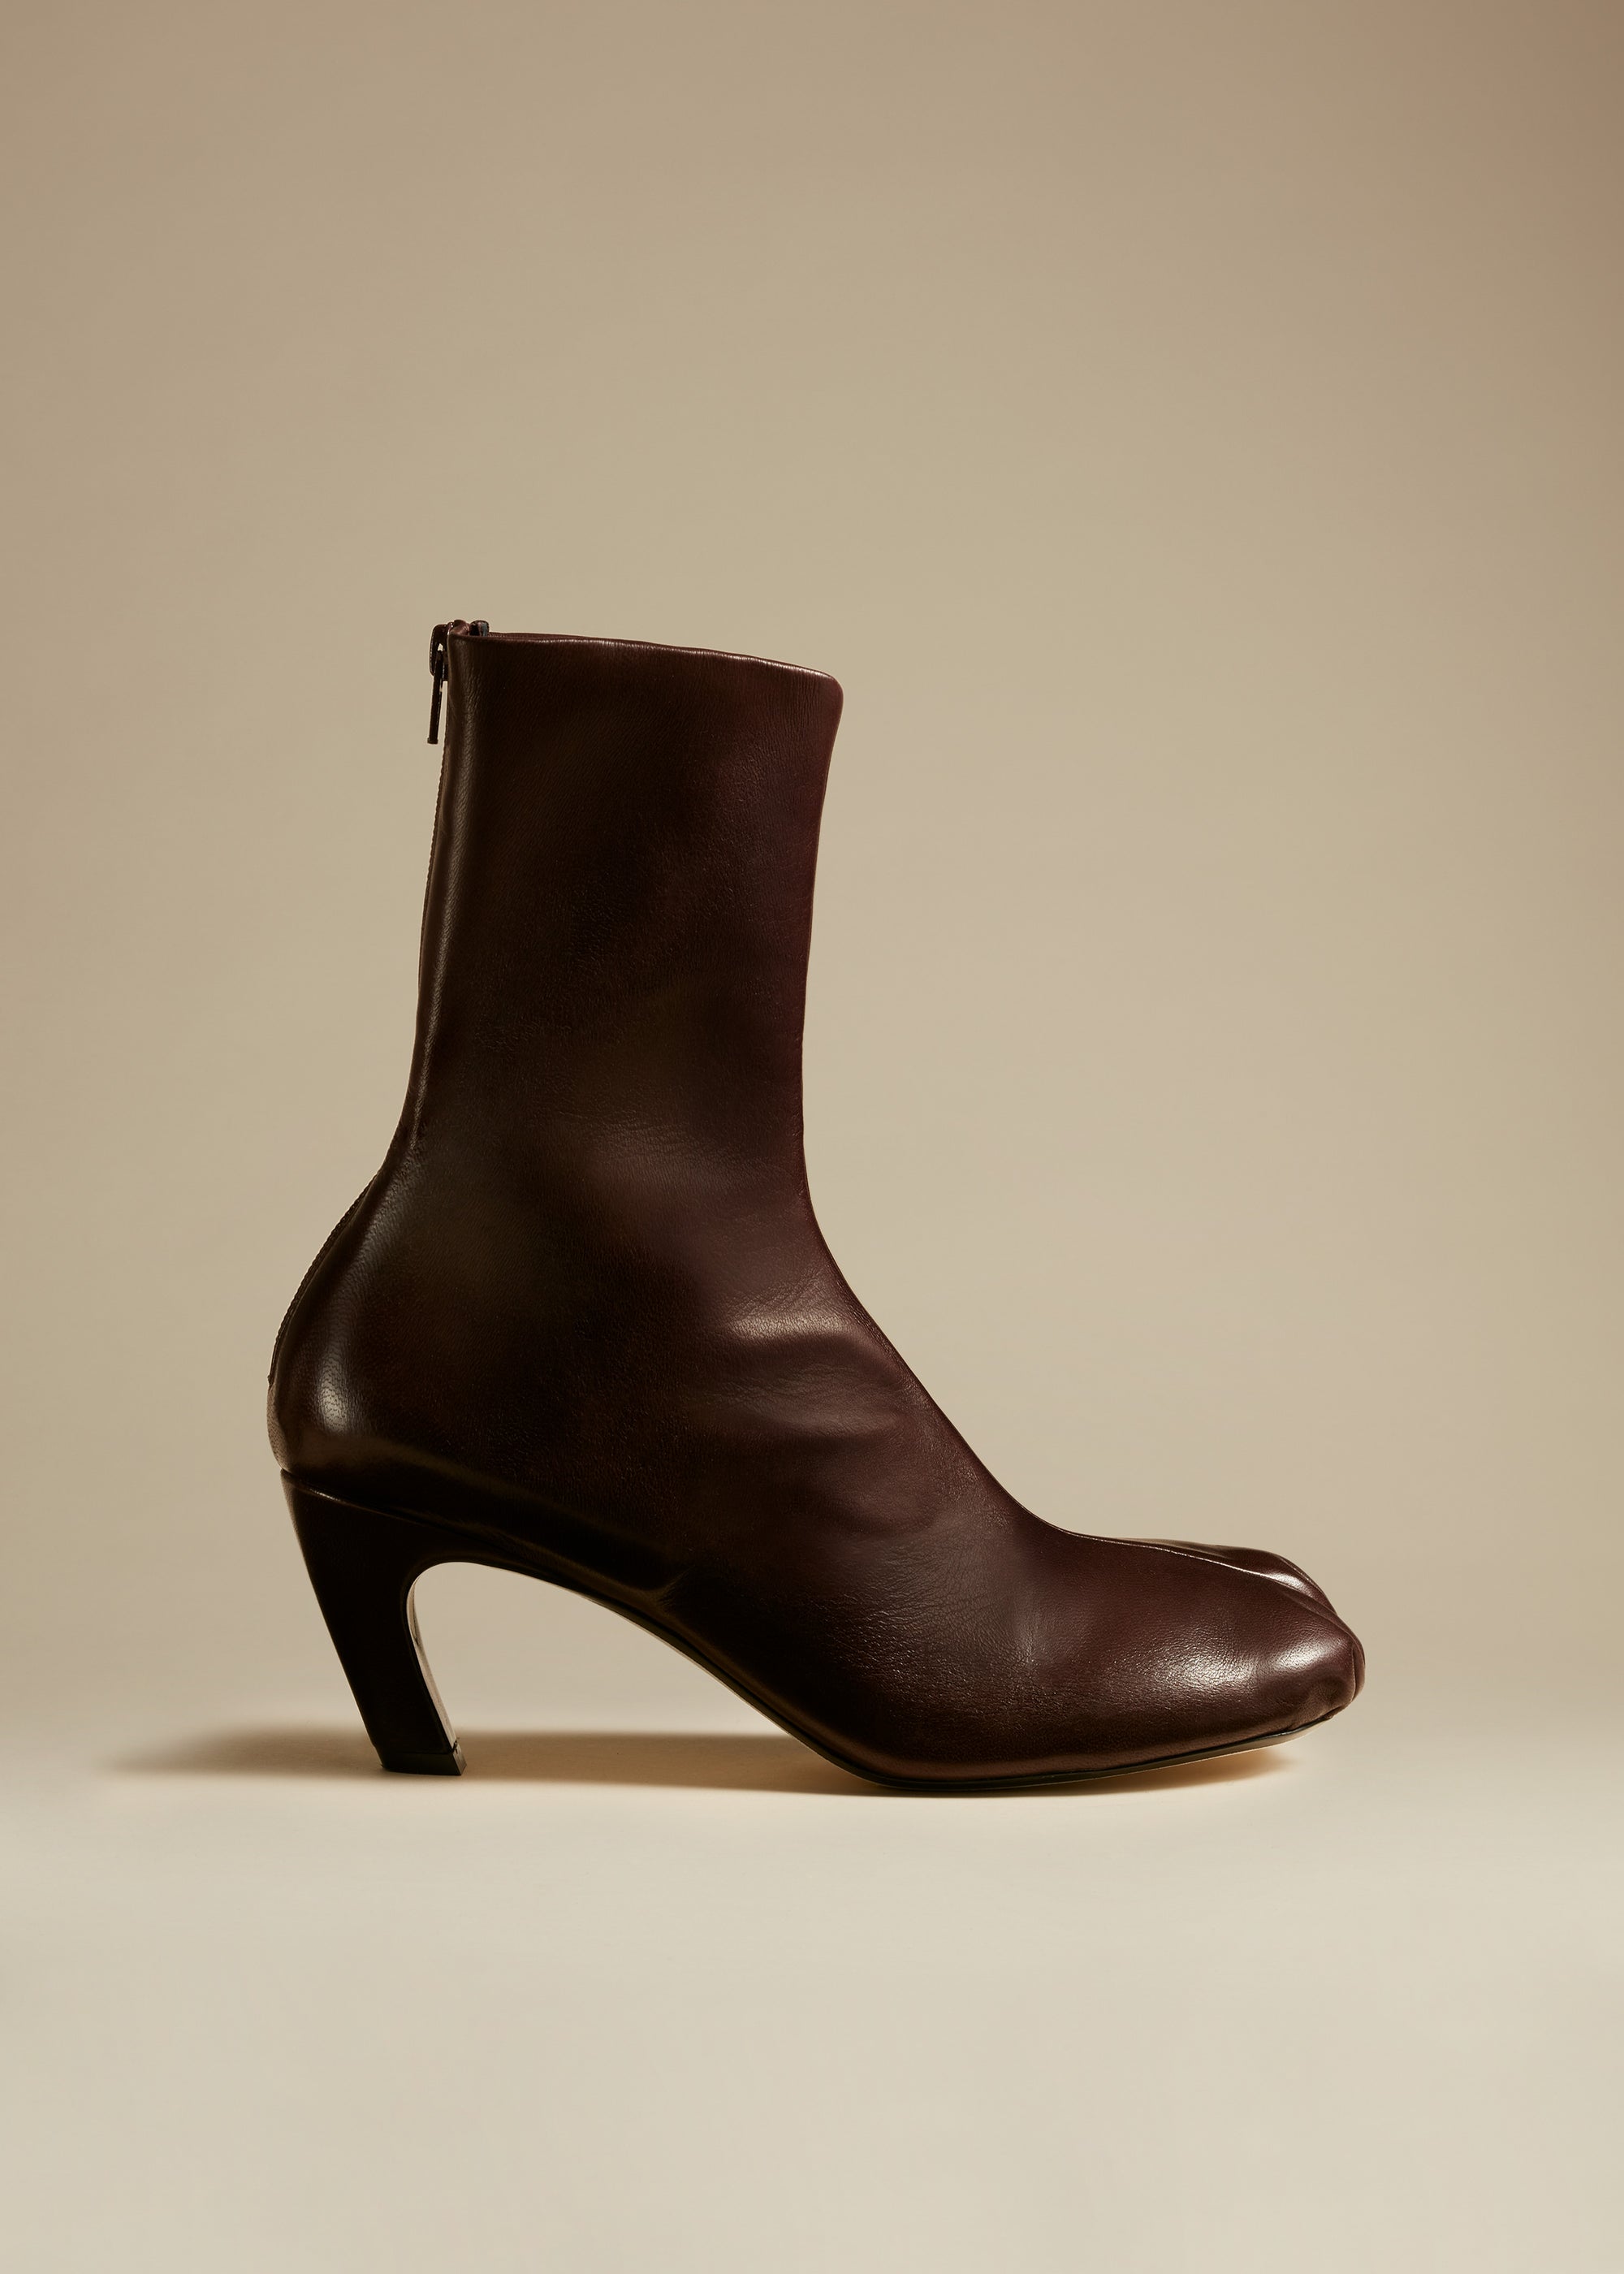 Normandy boot in leather - Bordeaux